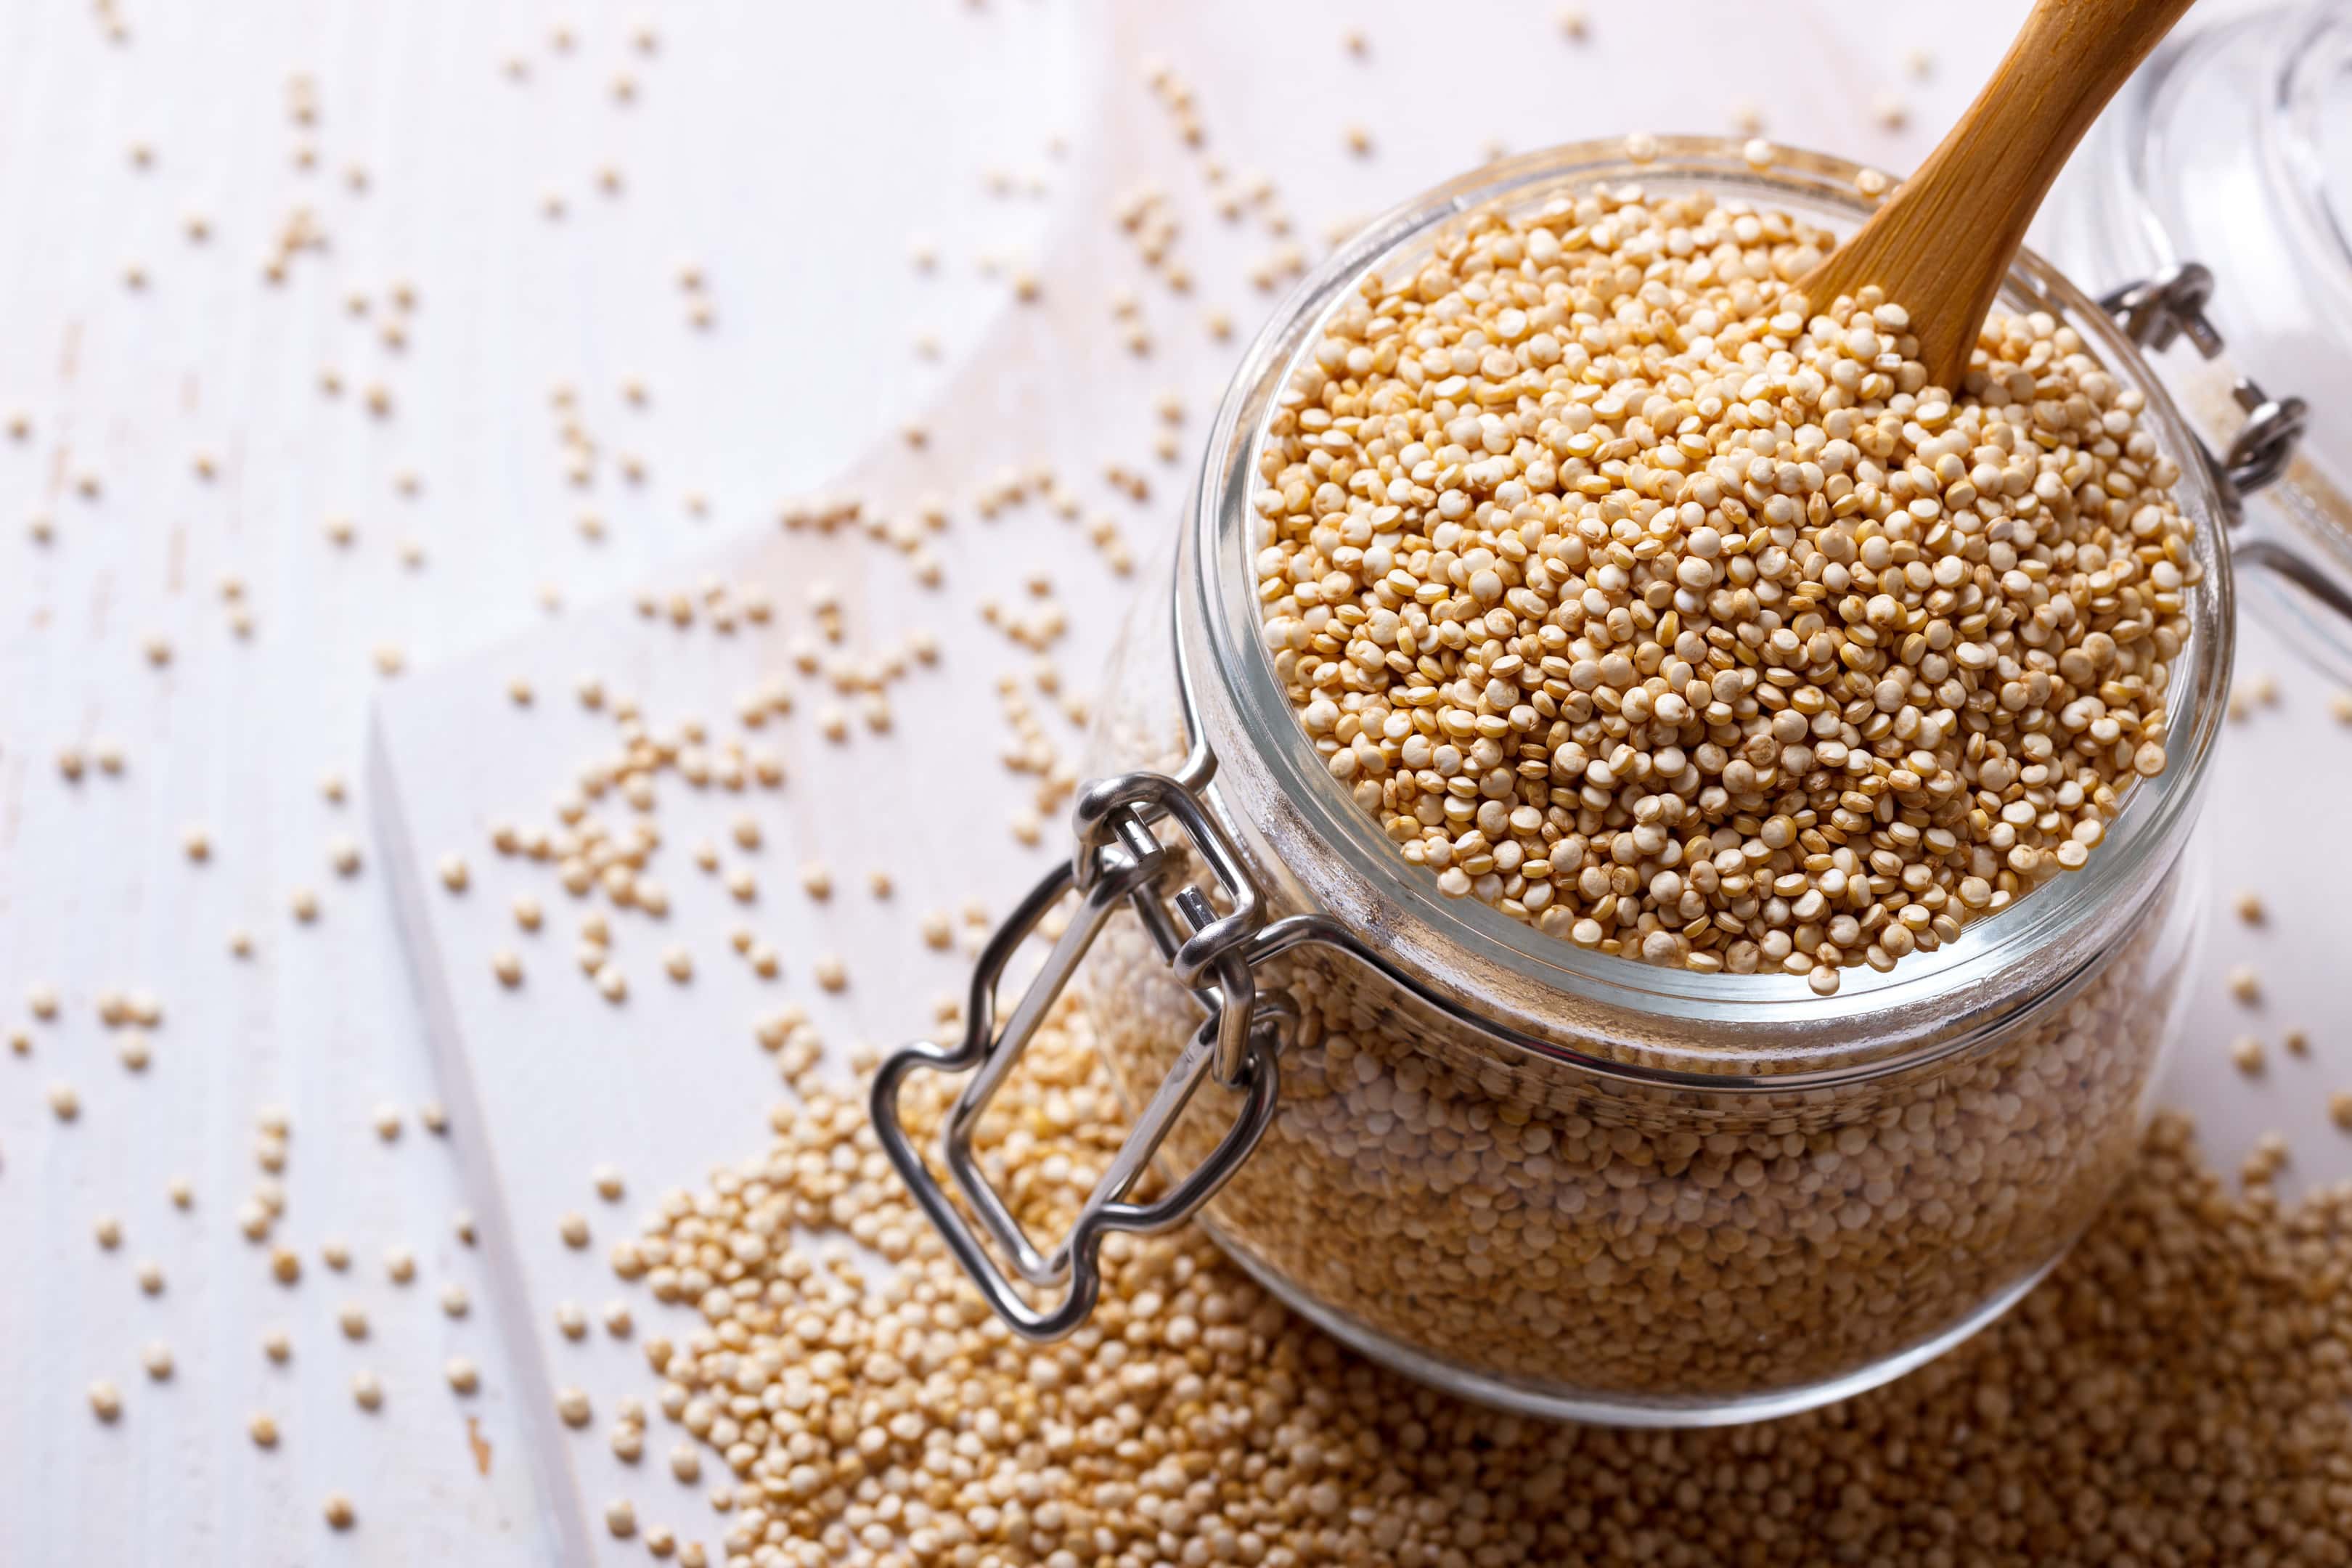 White quinoa seeds. Quinoa is one of our list of foods that make you taller